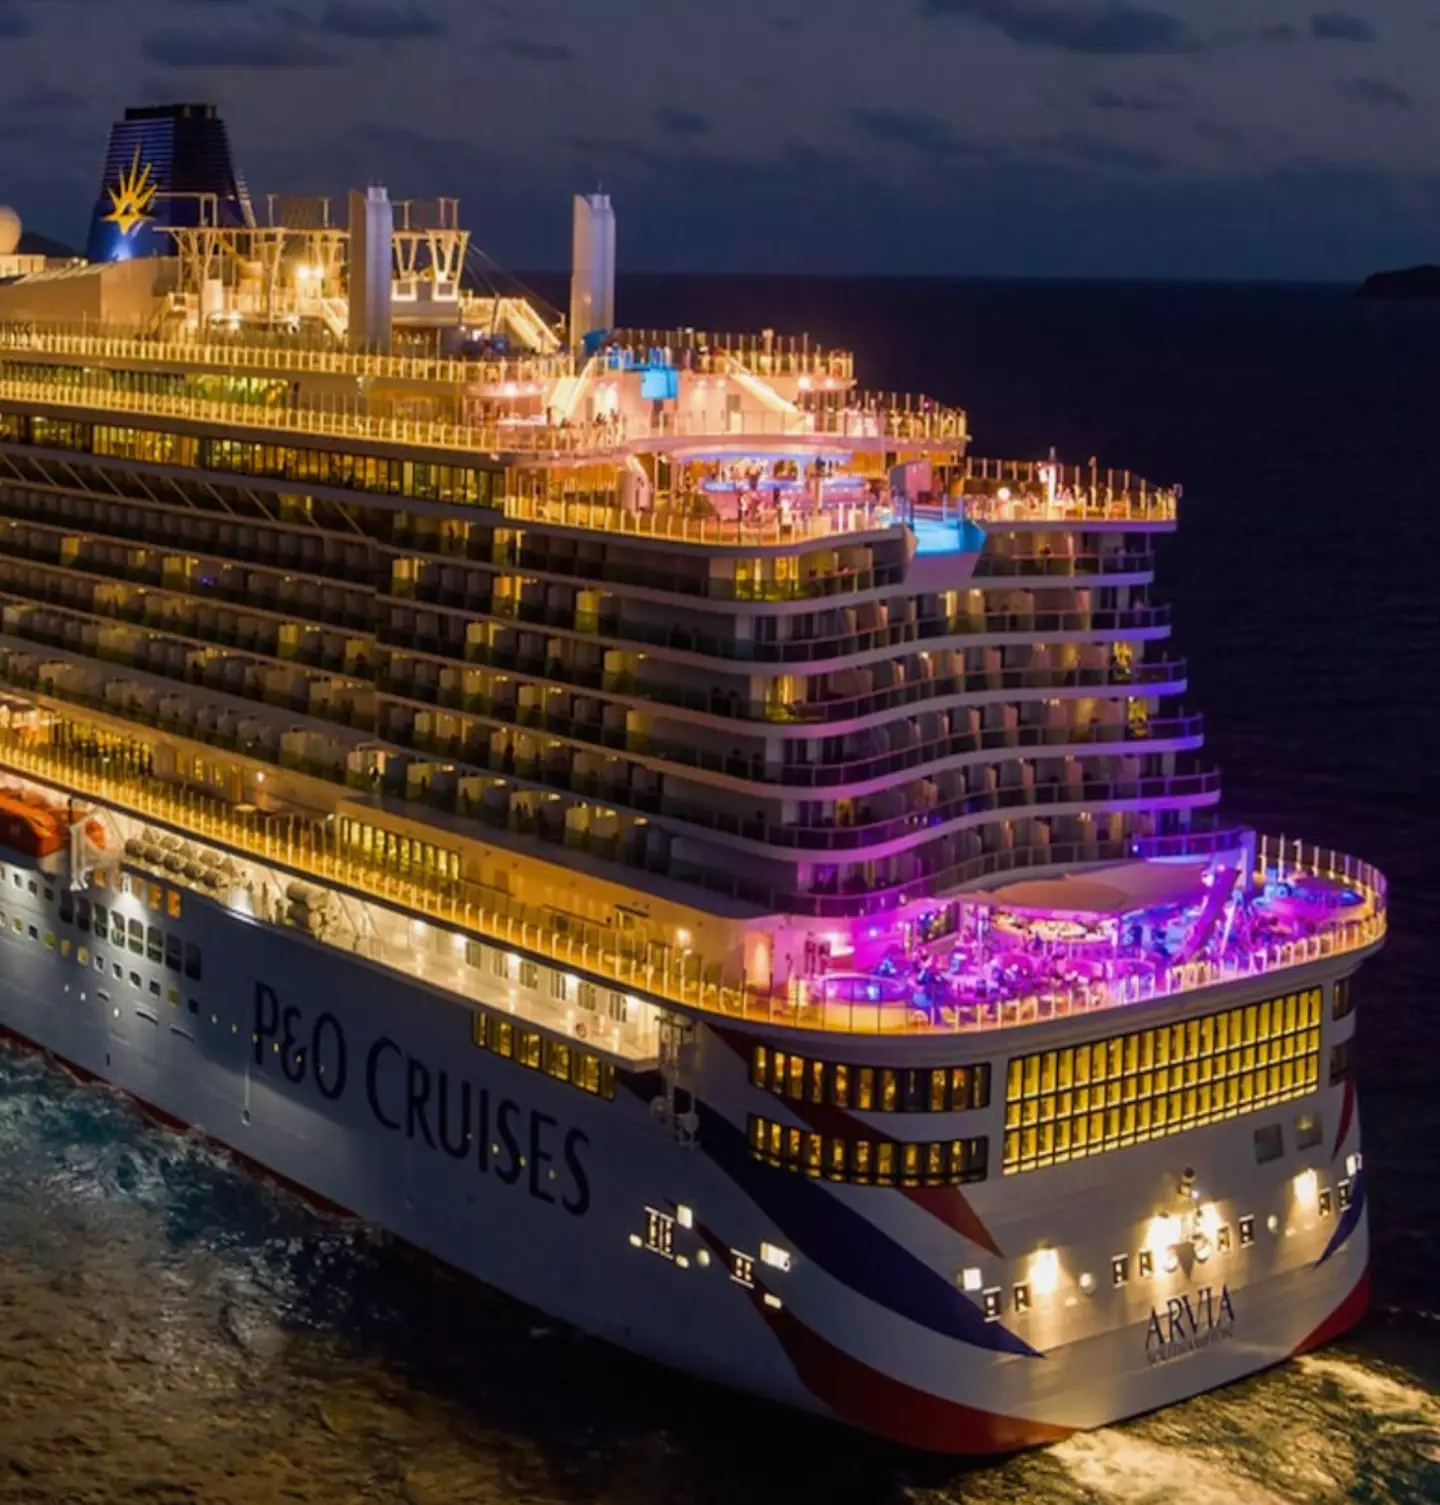 New alcohol rules are in place on some cruise-ships (P&O Cruises)